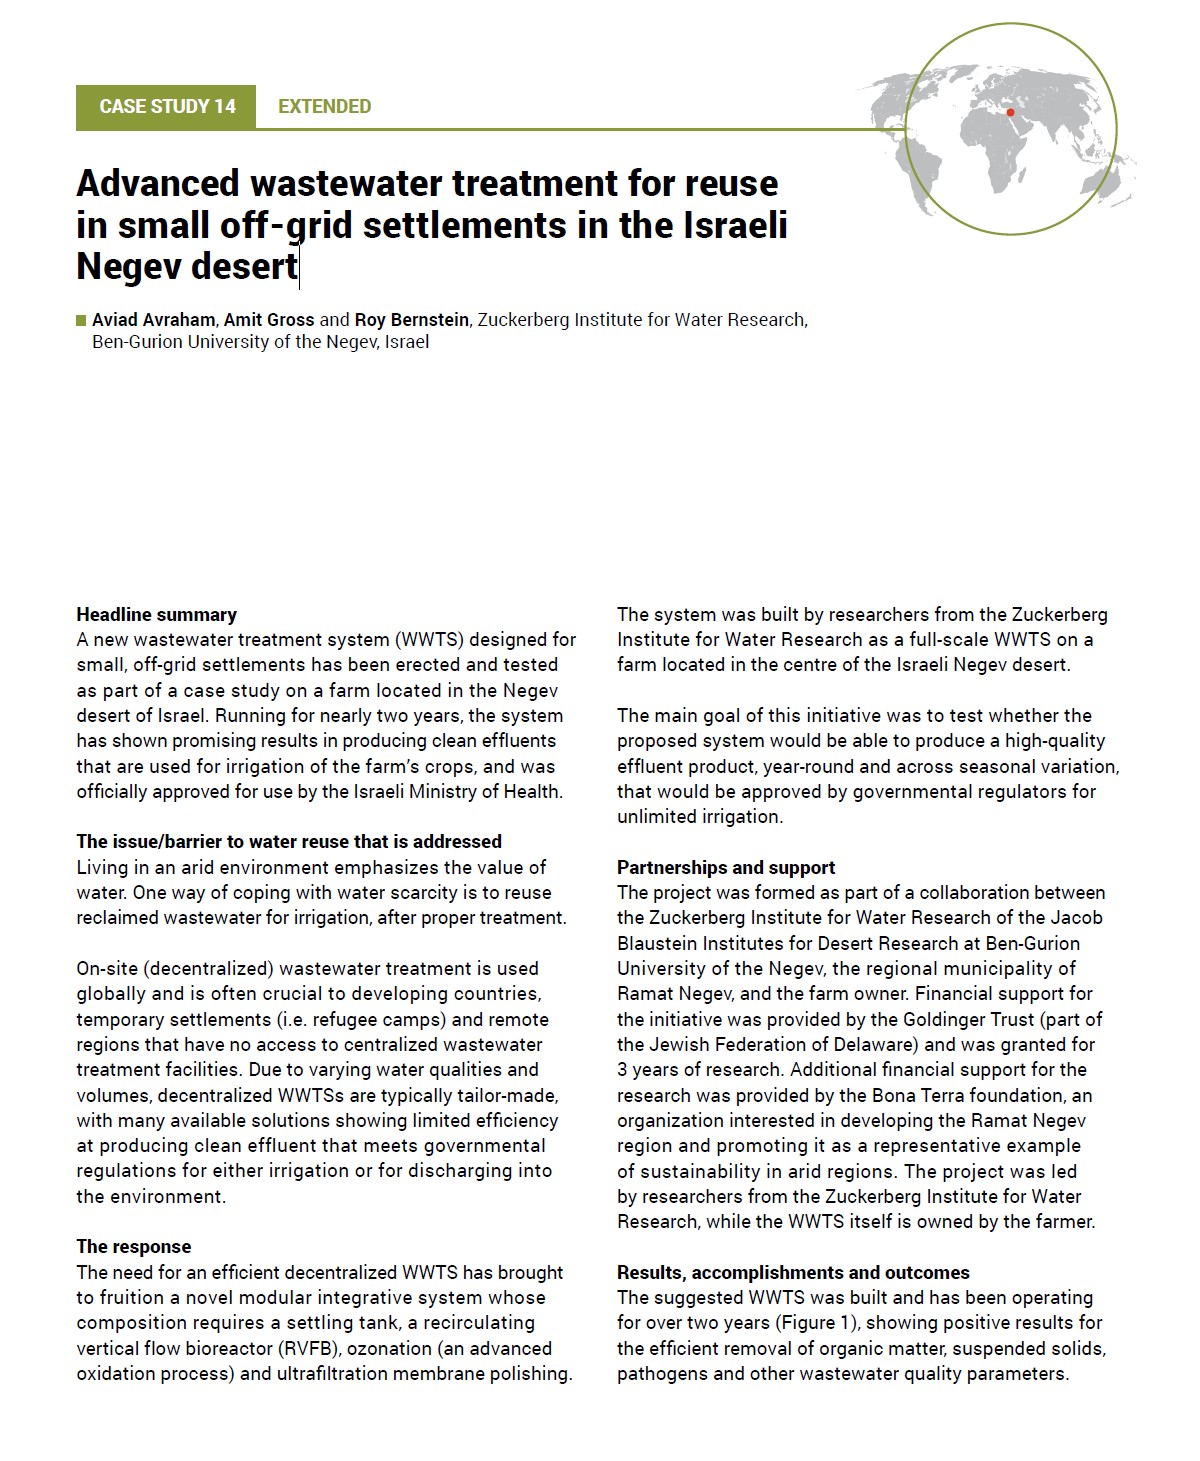 Case Study 14: Advanced wastewater treatment for reuse in small off-grid settlements in the Israeli Negev desert